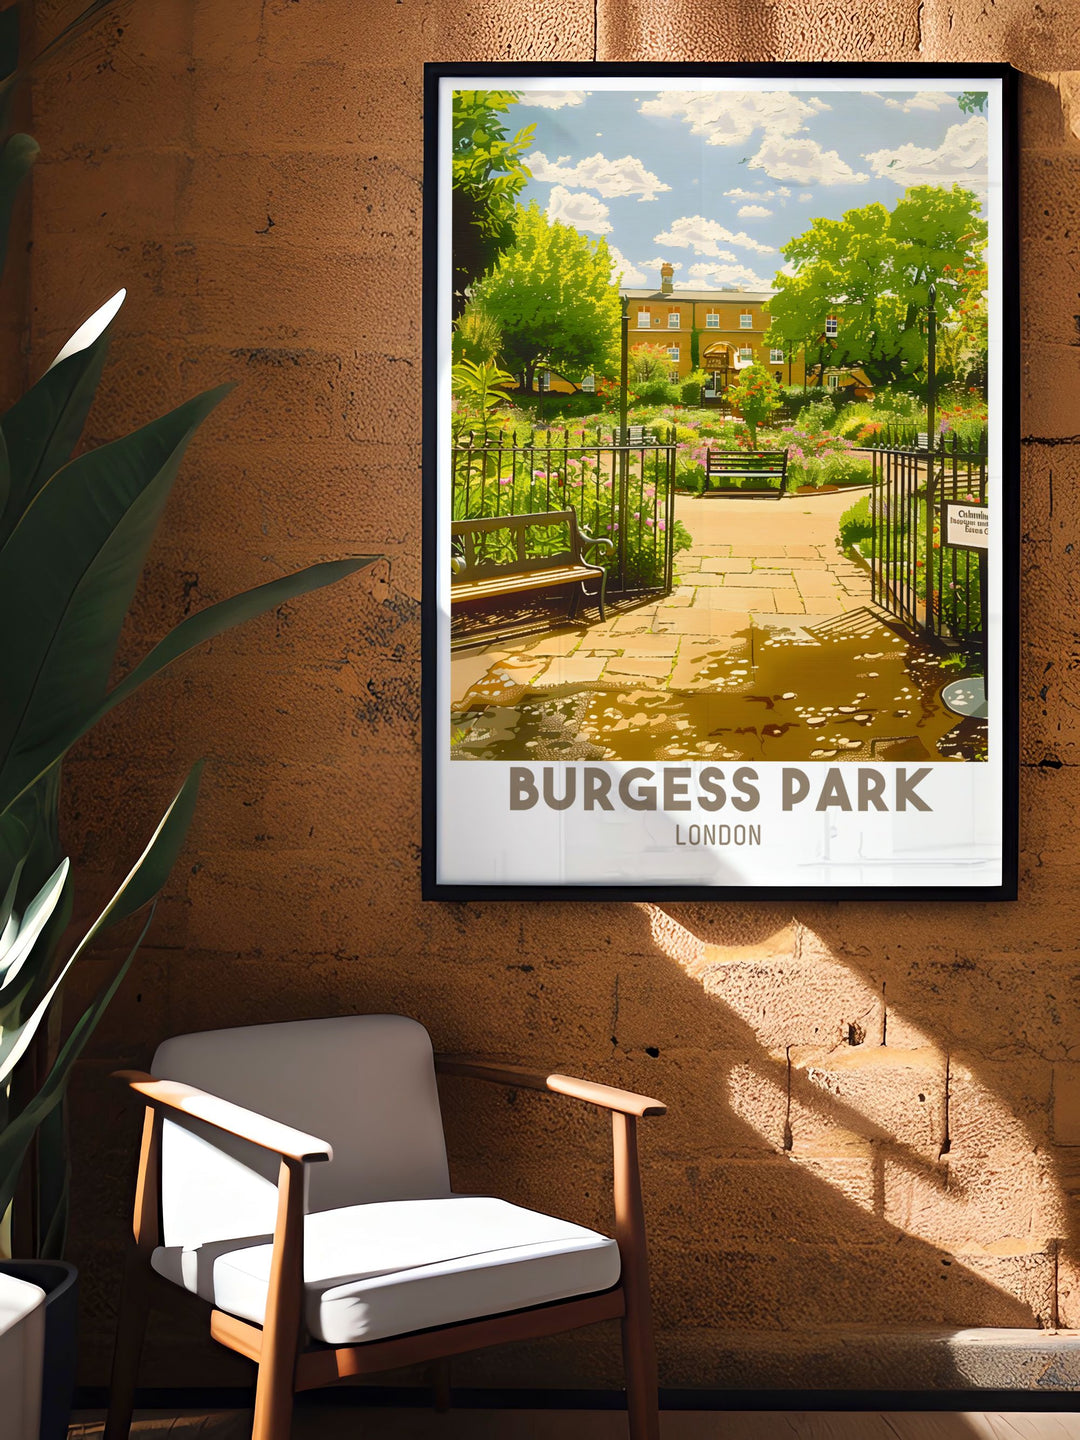 Discover the tranquility of Burgess Park with this exquisite London print. The artwork showcases the serene Chumleigh Gardens and the inviting Chumleigh Café, offering a glimpse into one of South East Londons hidden gems.